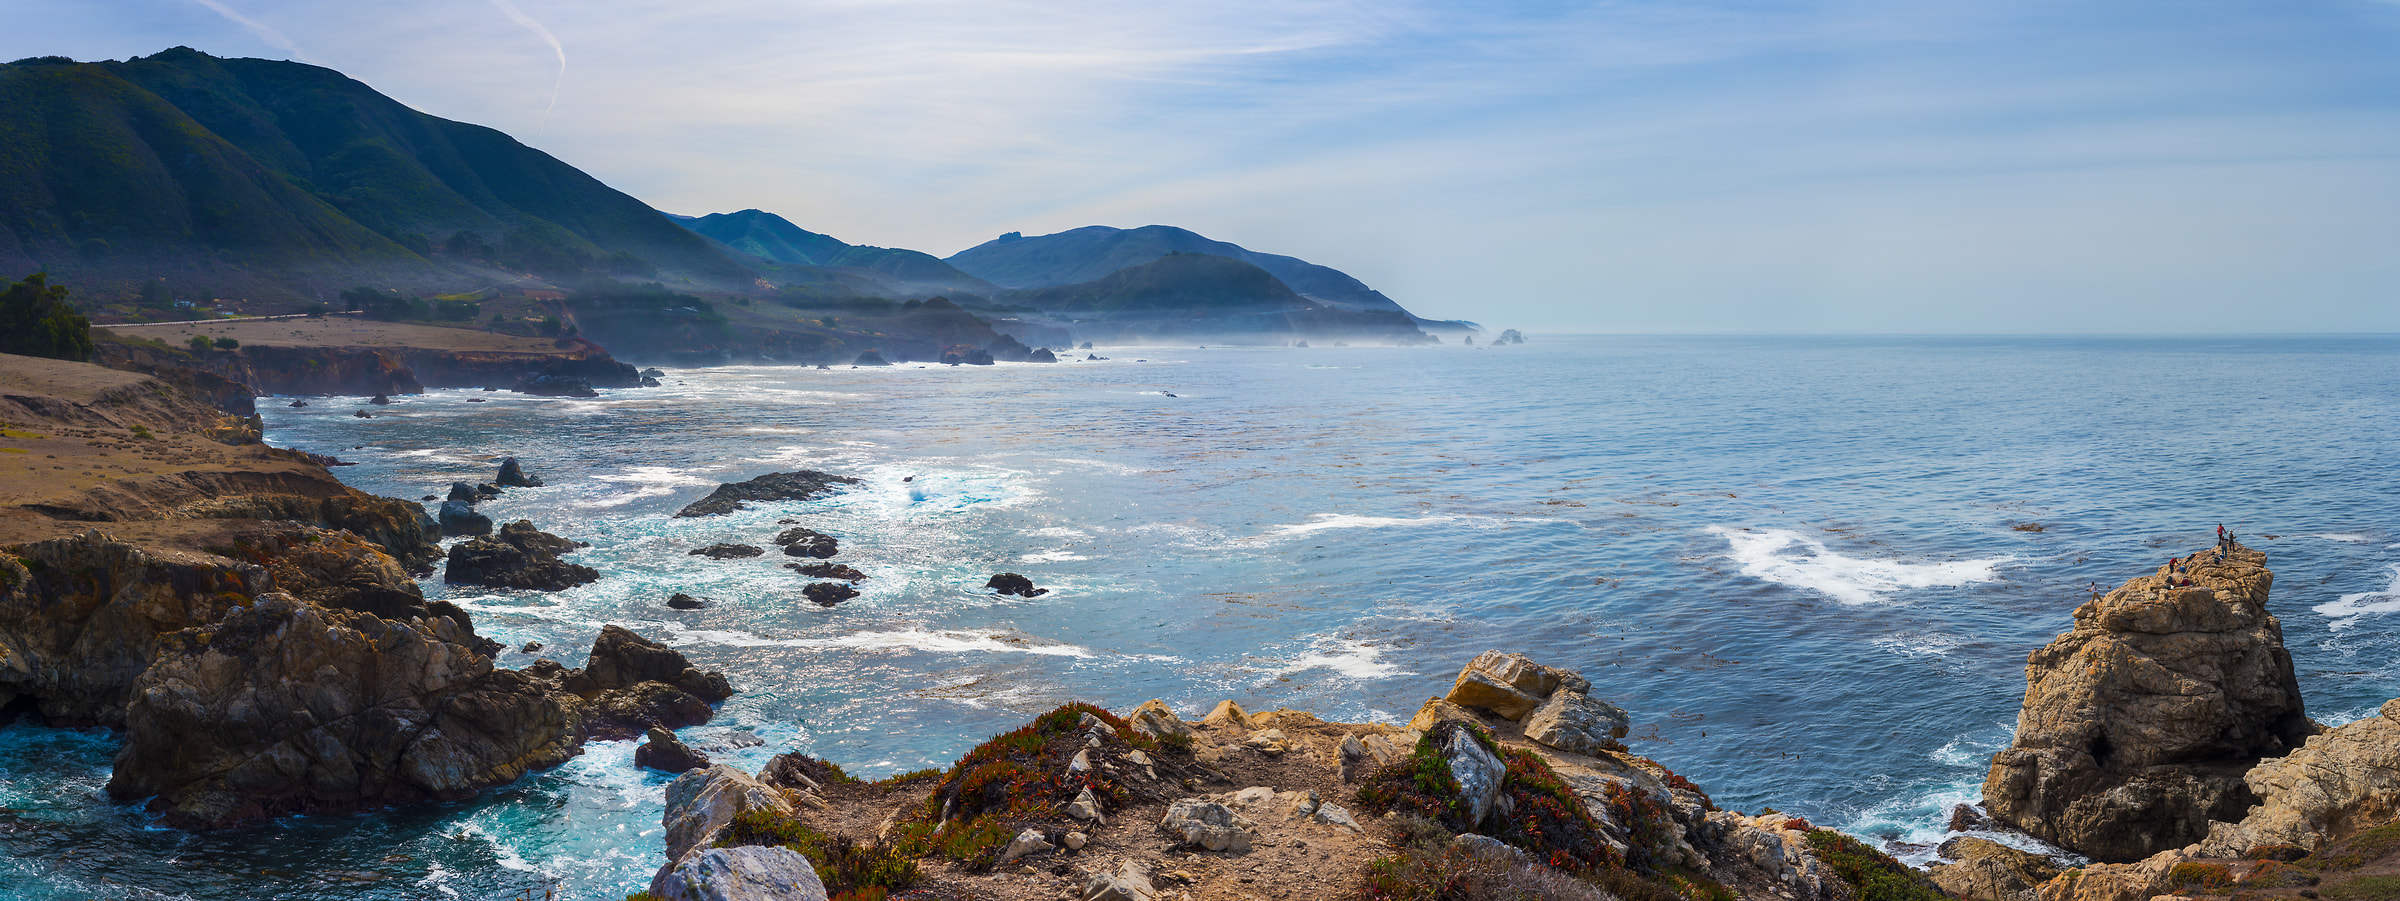 342 megapixels! A very high resolution, large-format VAST photo print of the Big Sur coastline and the Pacific Ocean; seascape photograph created by Jim Tarpo in Big Sur, California.